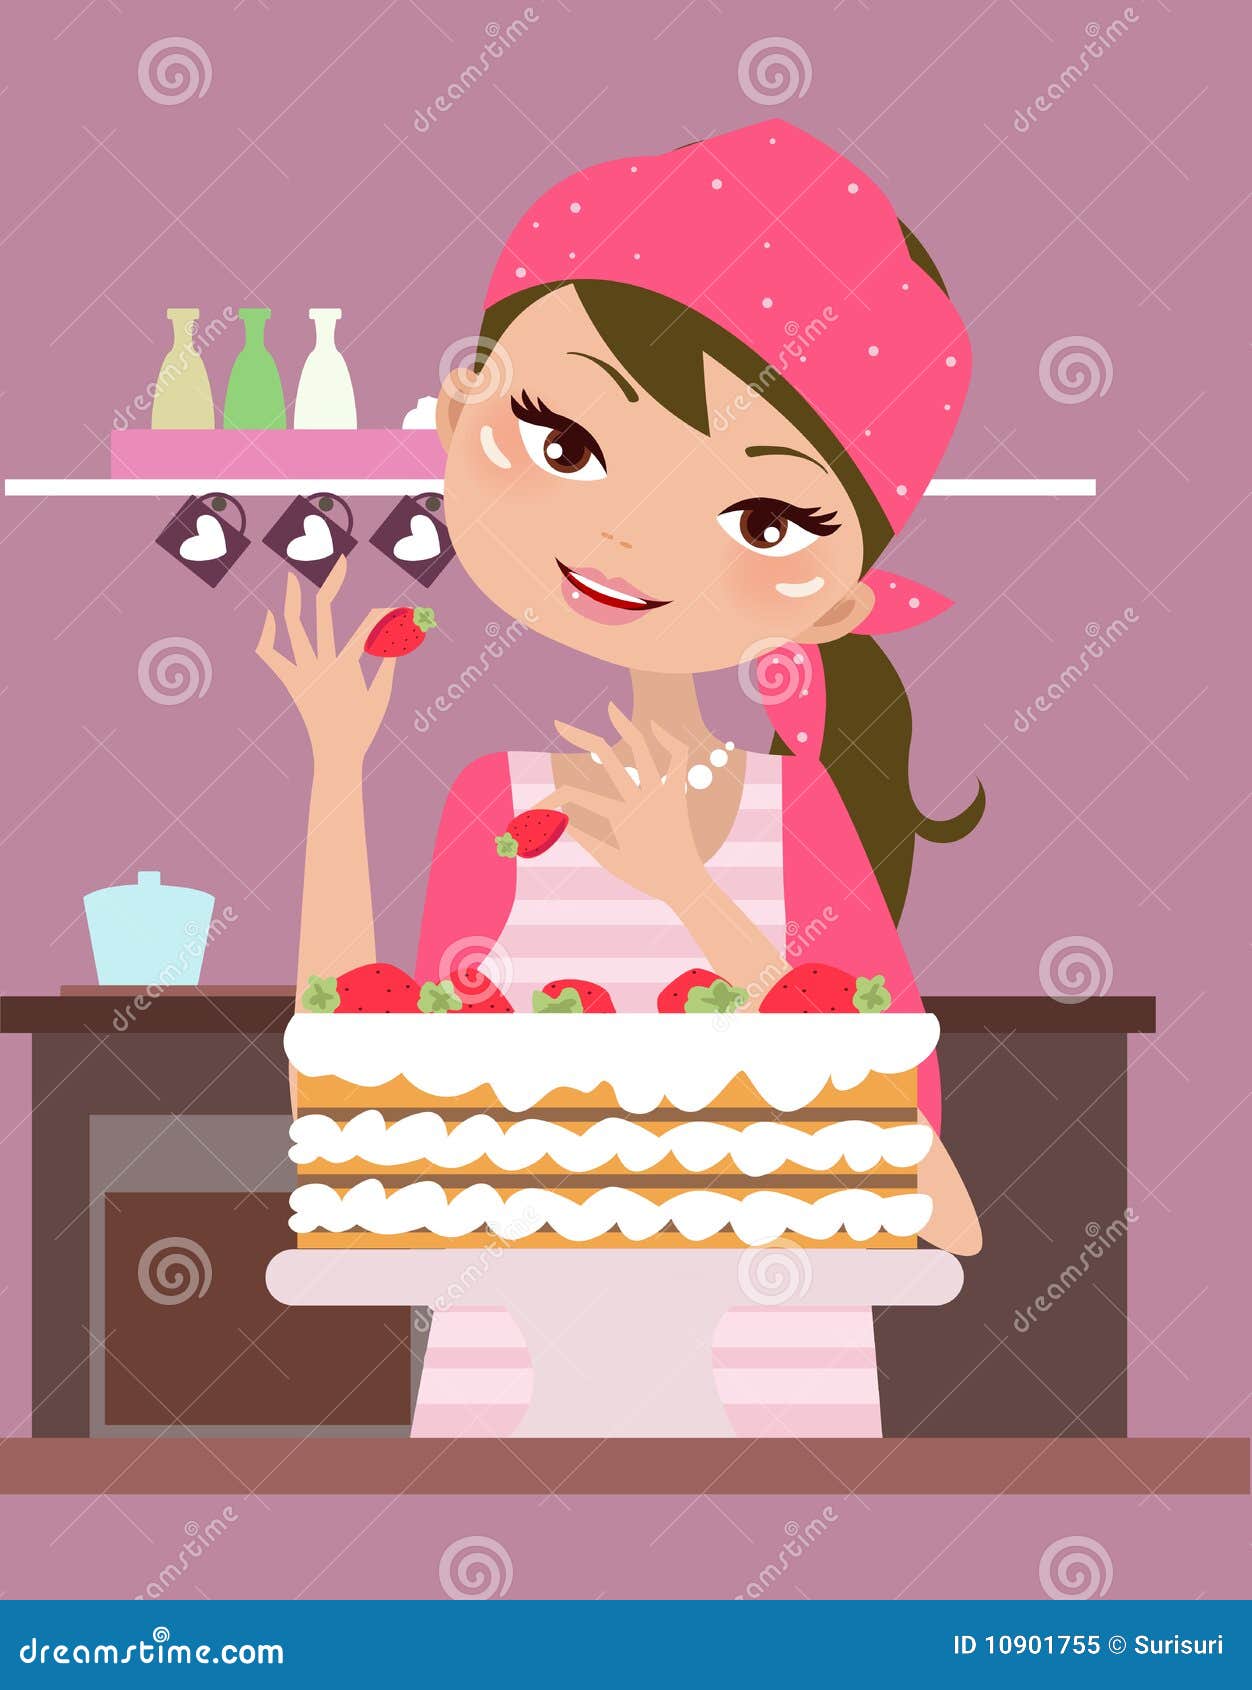 A pretty housewife- Art Vector Illustration.